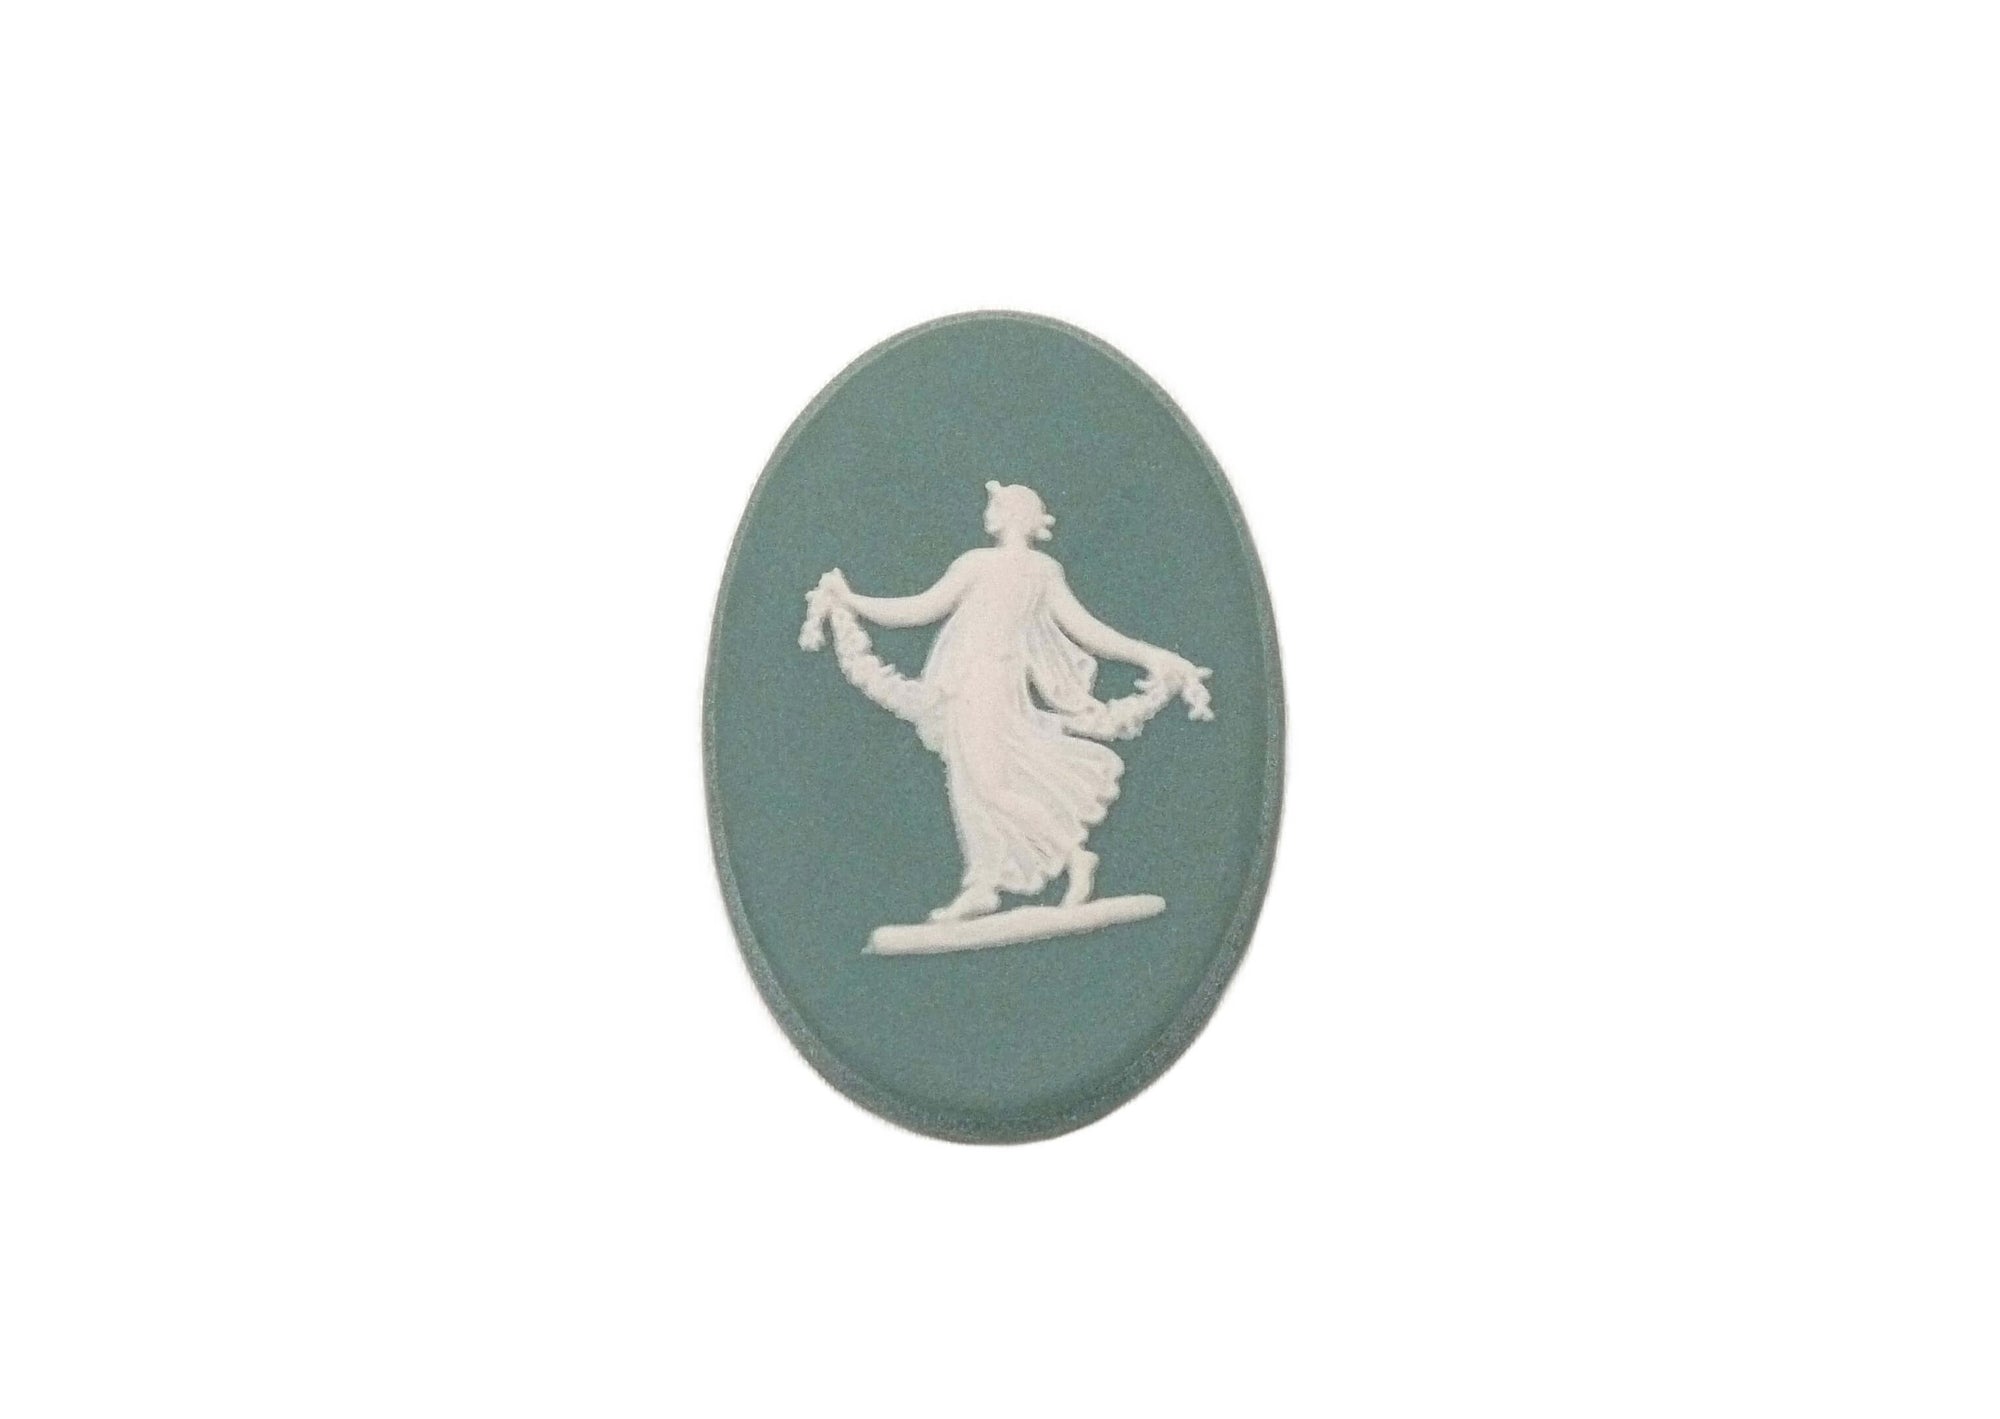 Wedgwood Jasperware Cameo, White on Teal, 1970's, Floral Lady